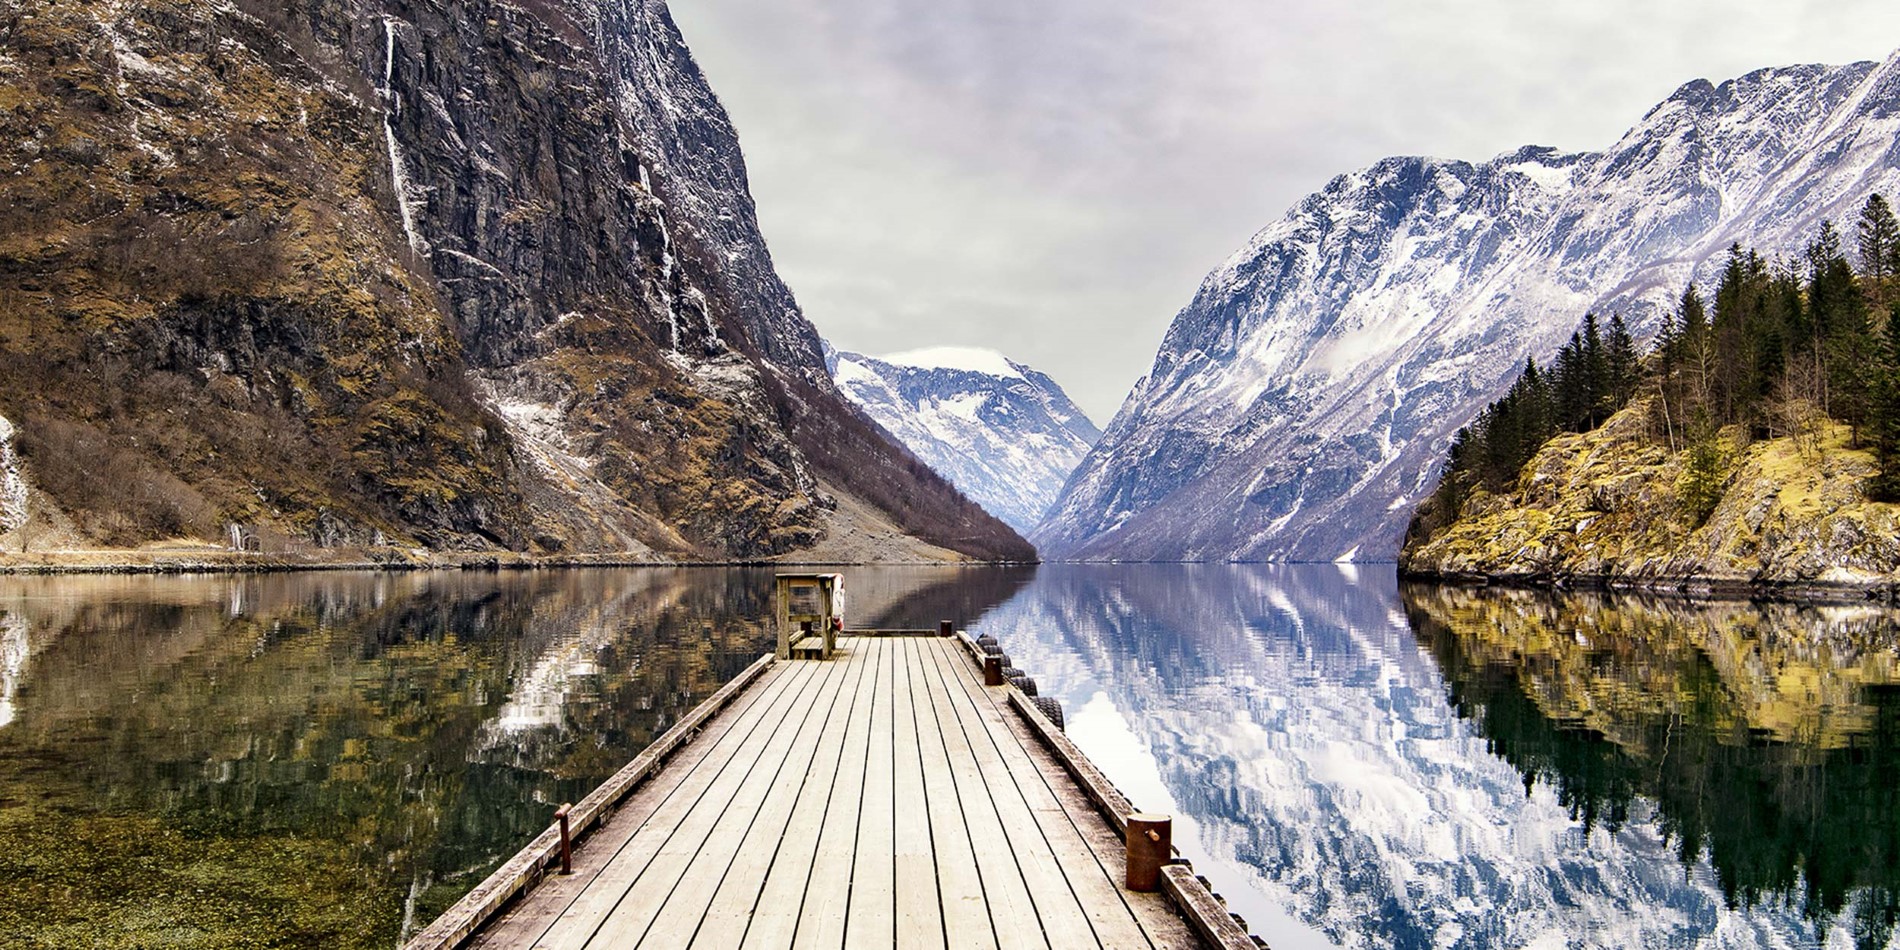 If you come during winter, the Nærøyfjord will look something like this